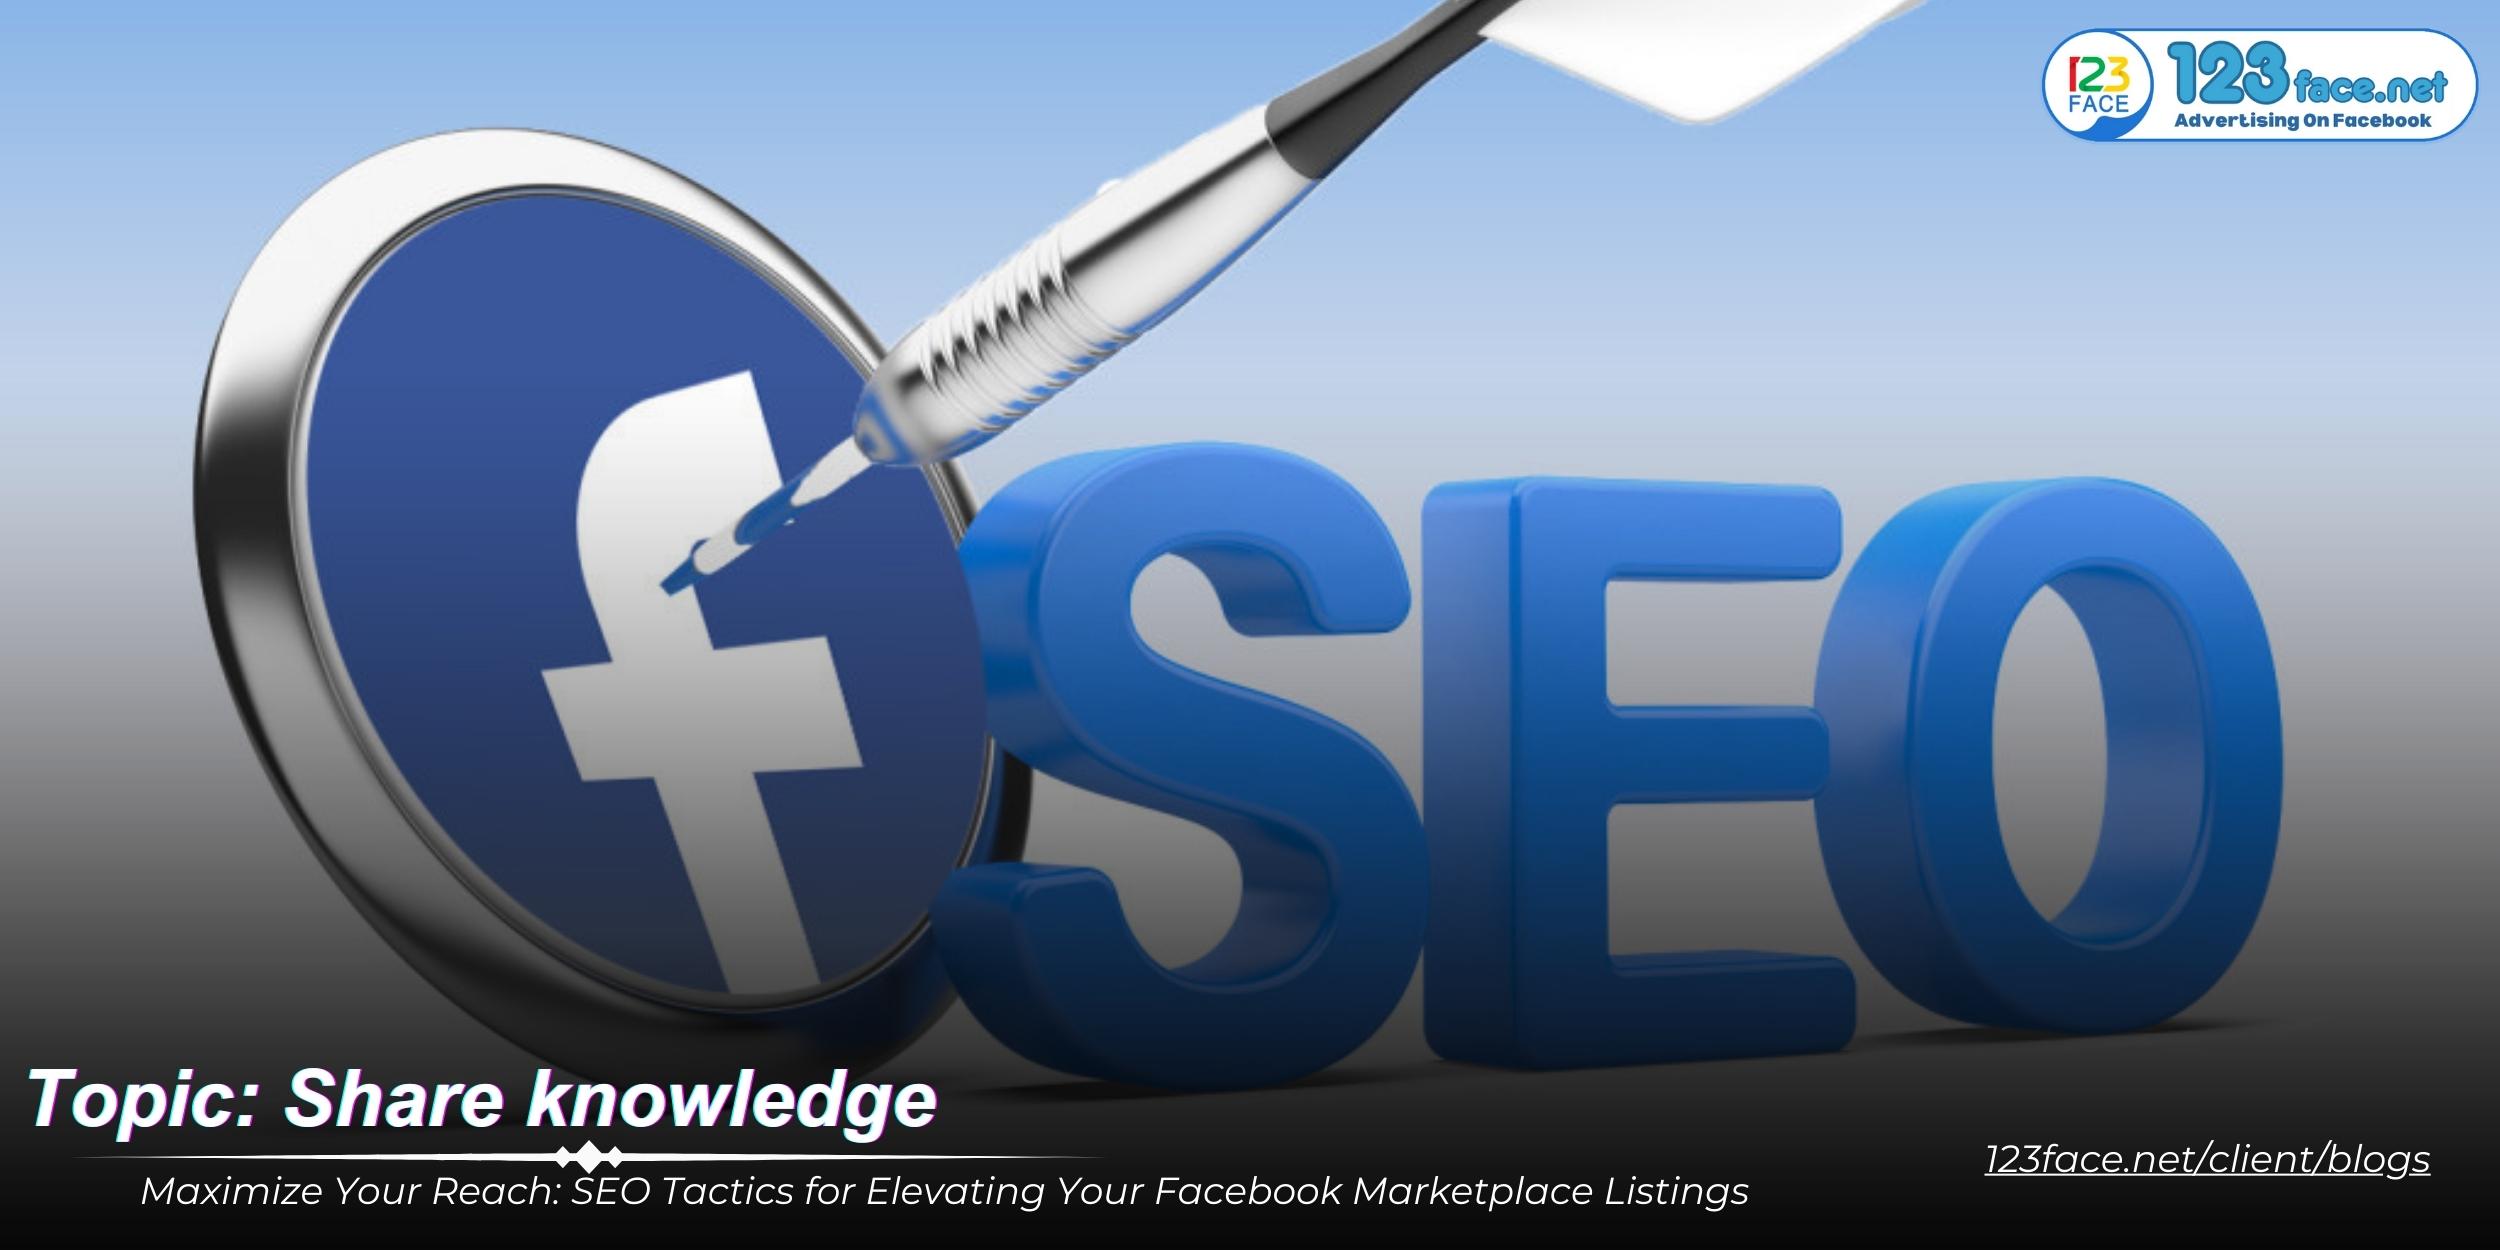 Maximize Your Reach: SEO Tactics for Elevating Your Facebook Marketplace Listings